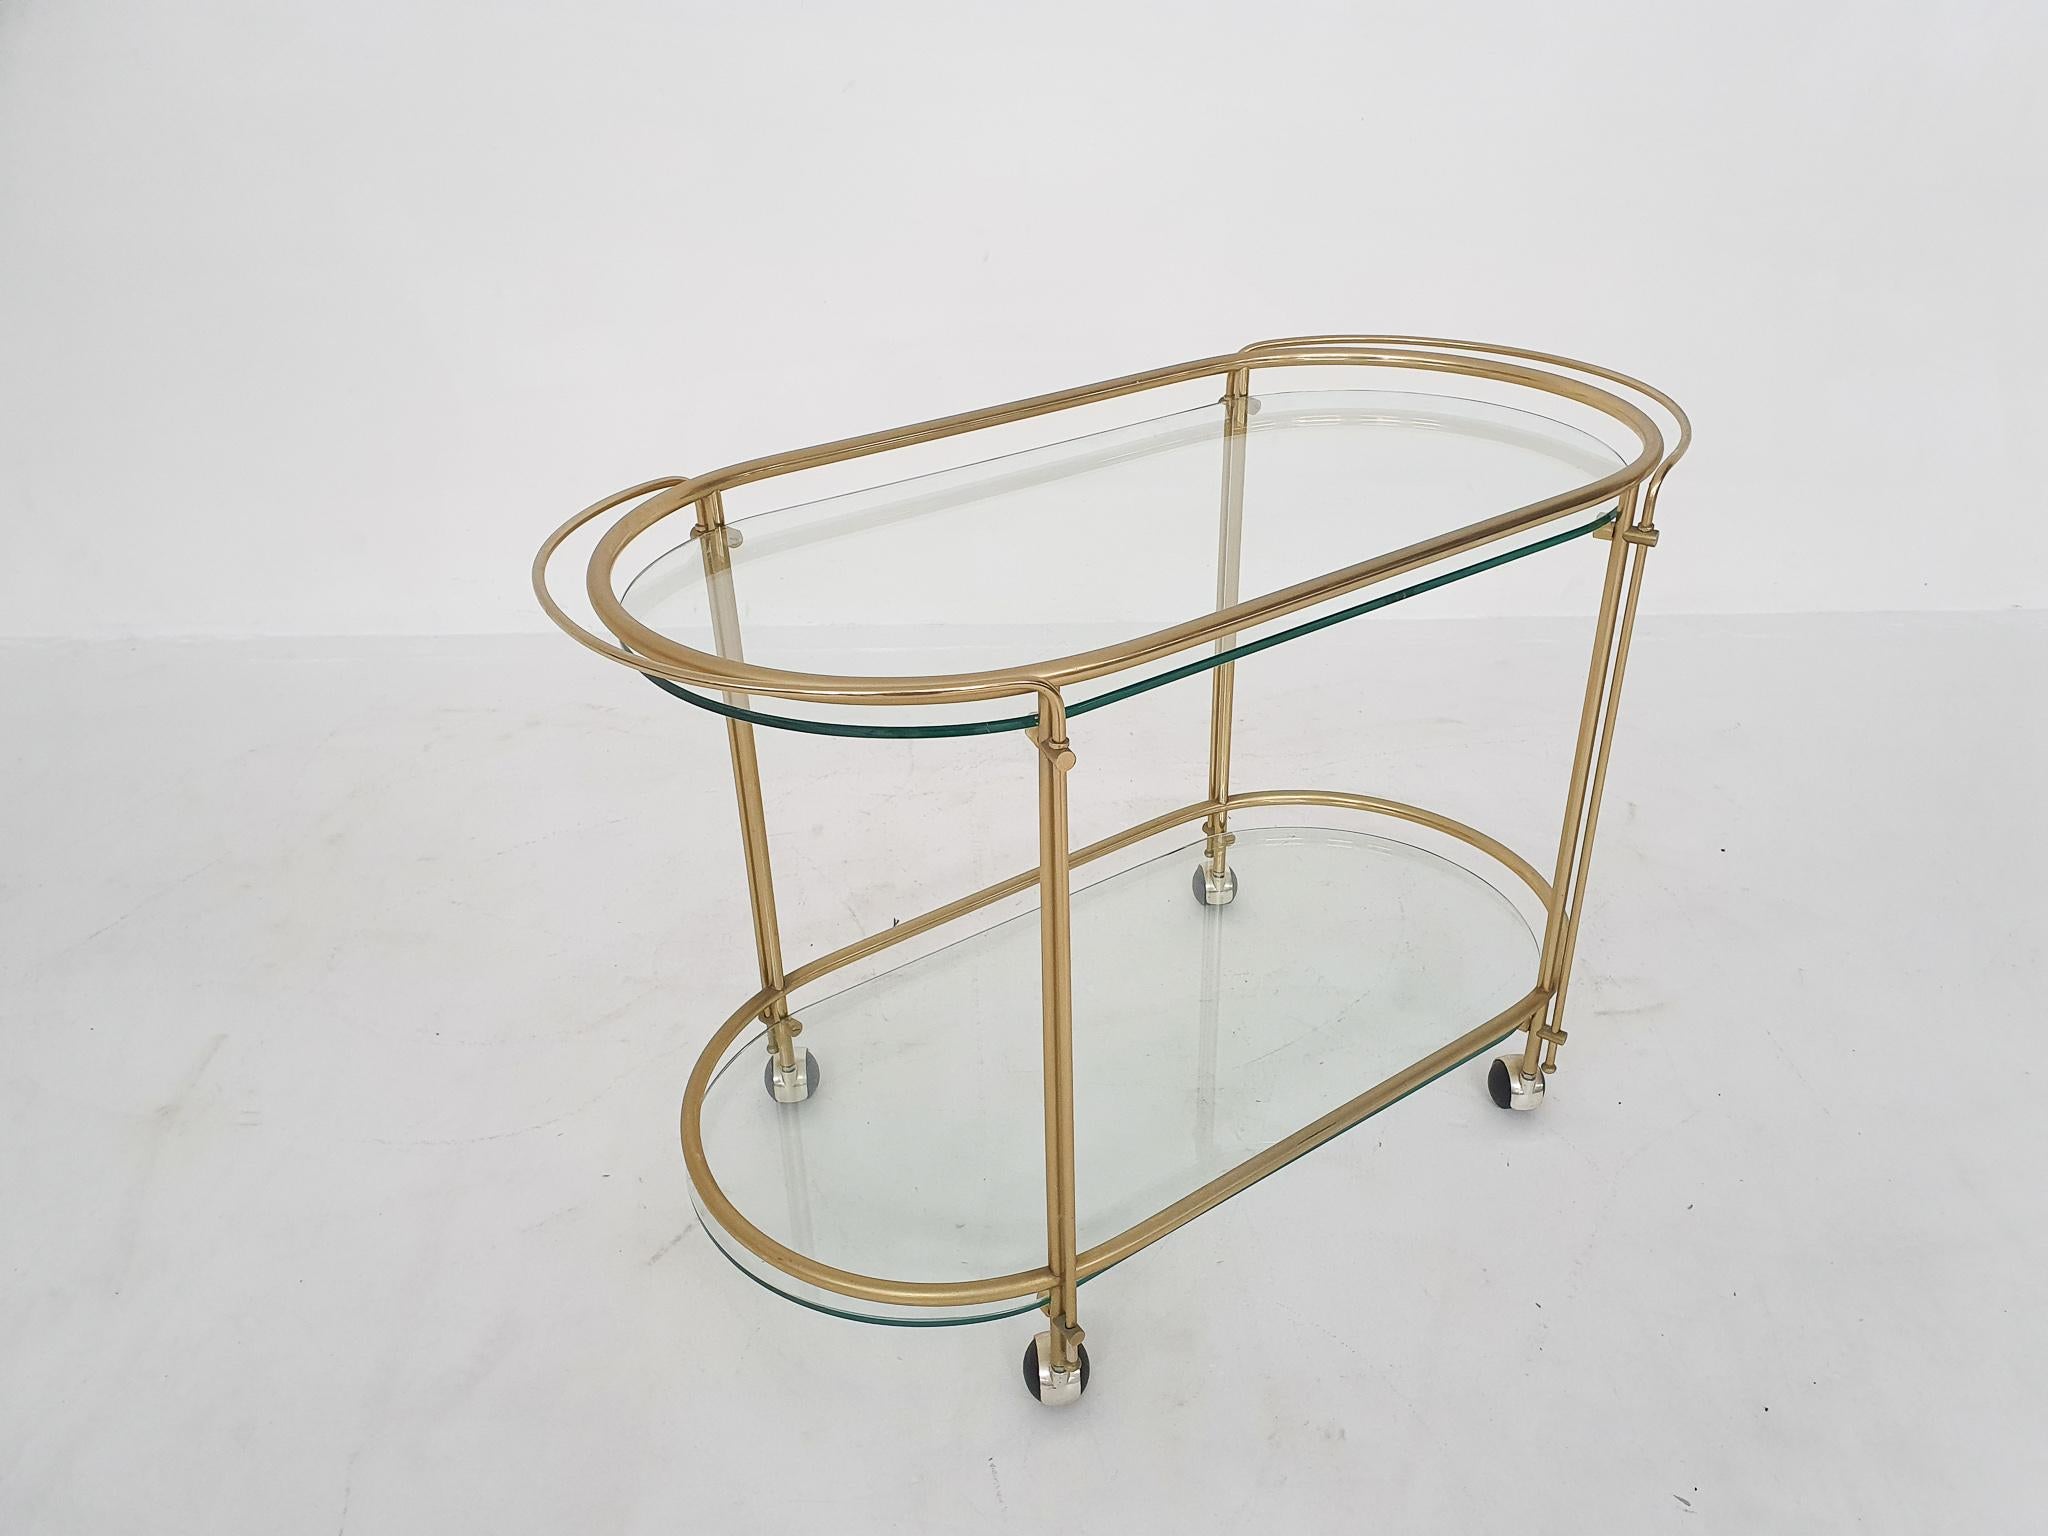 Gold metal bar cart with glass shelves. The upper handle is extendable.
In good condition.